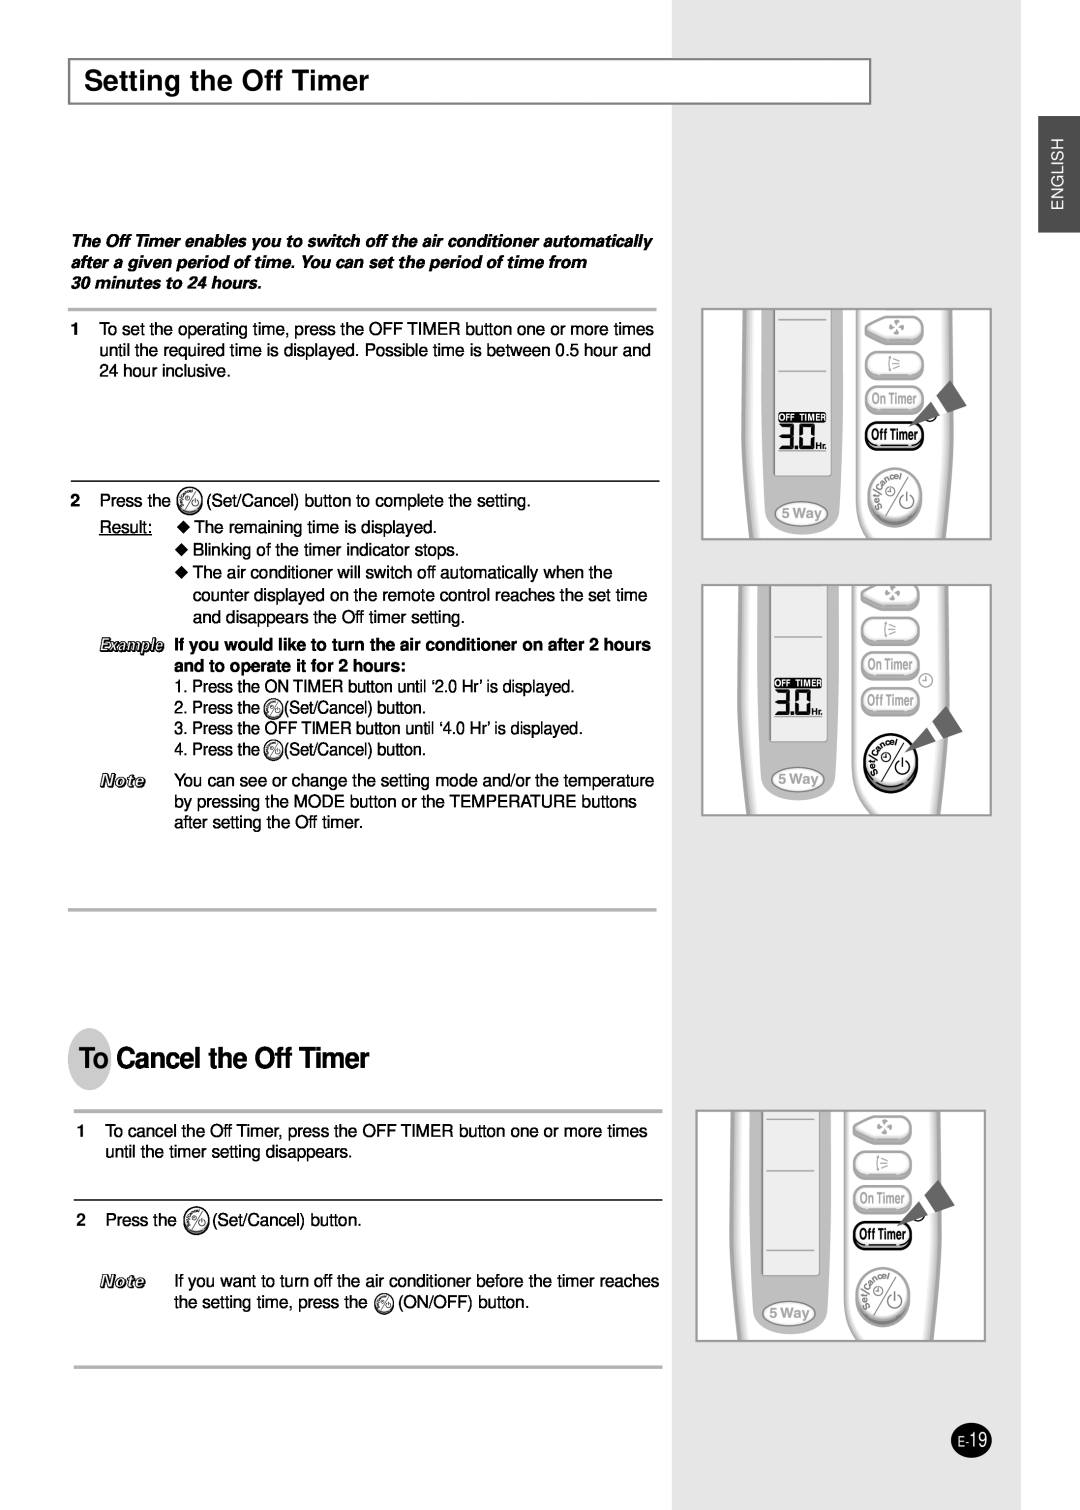 Samsung AD18B1C09 installation manual Setting the Off Timer, To Cancel the Off Timer, English, minutes to 24 hours 